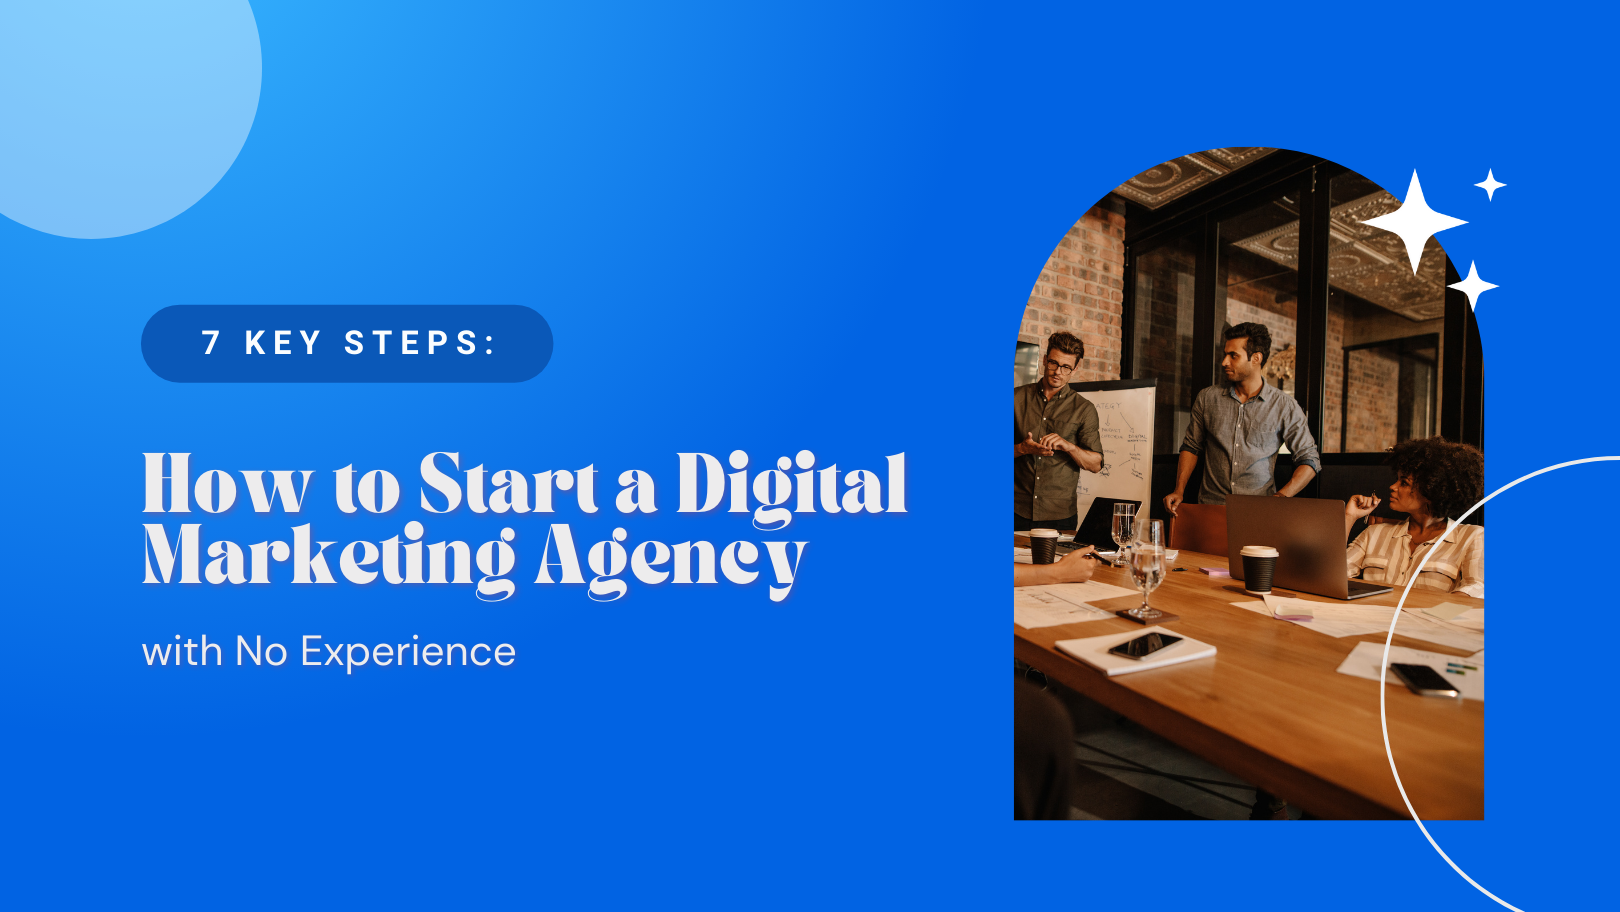 7 Key Steps: How to Start a Digital Marketing Agency with No Experience